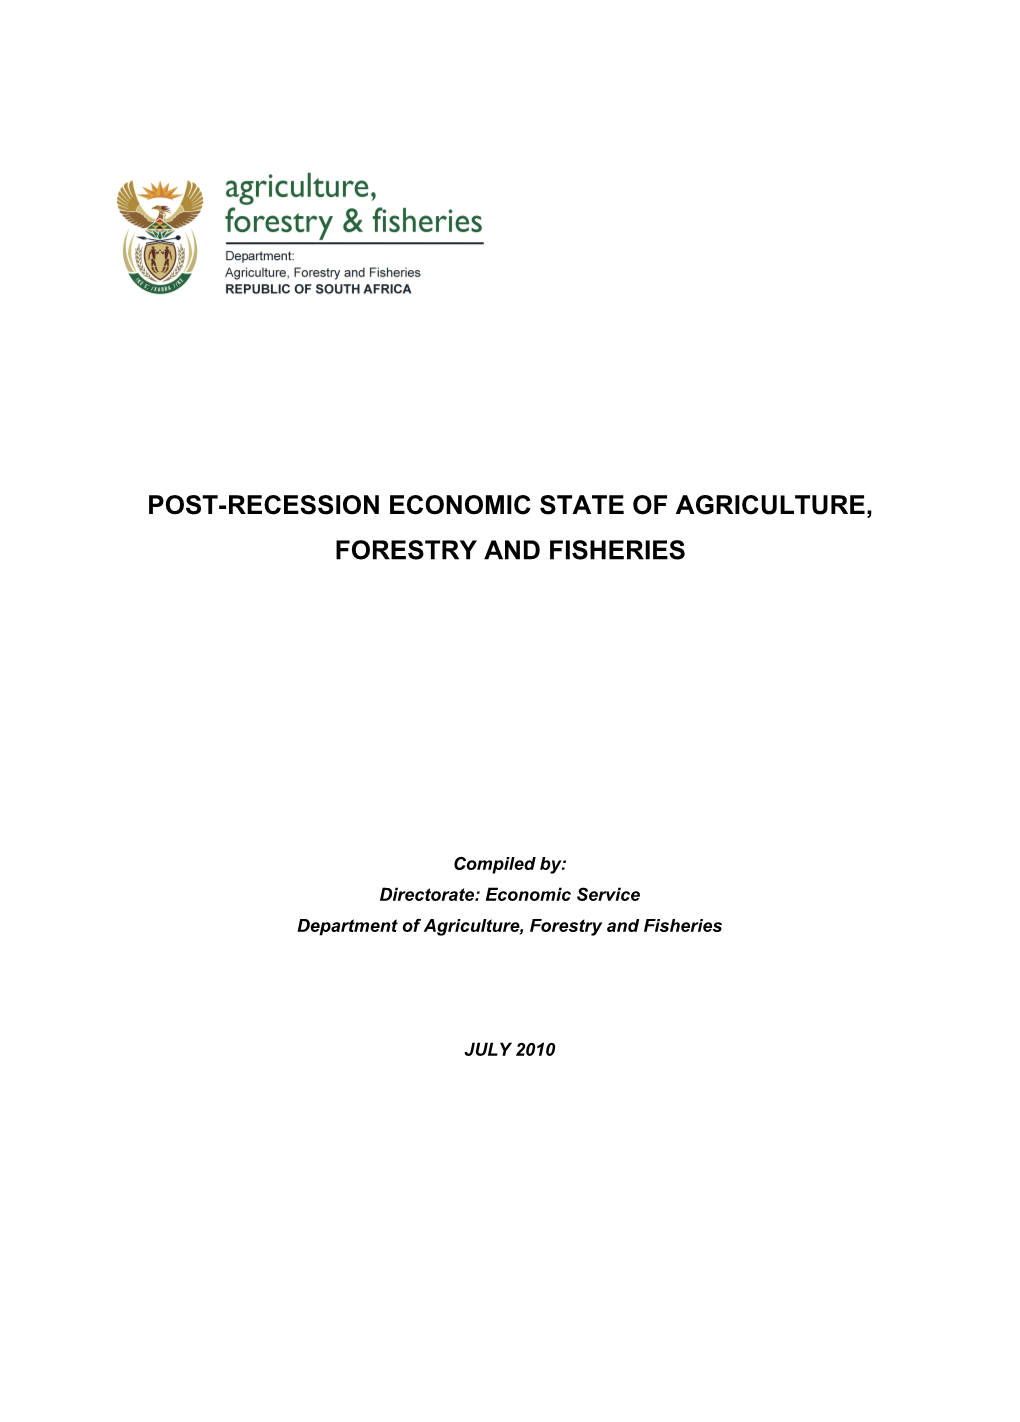 Post-Recession Economic State of Agriculture, Forestry and Fisheries